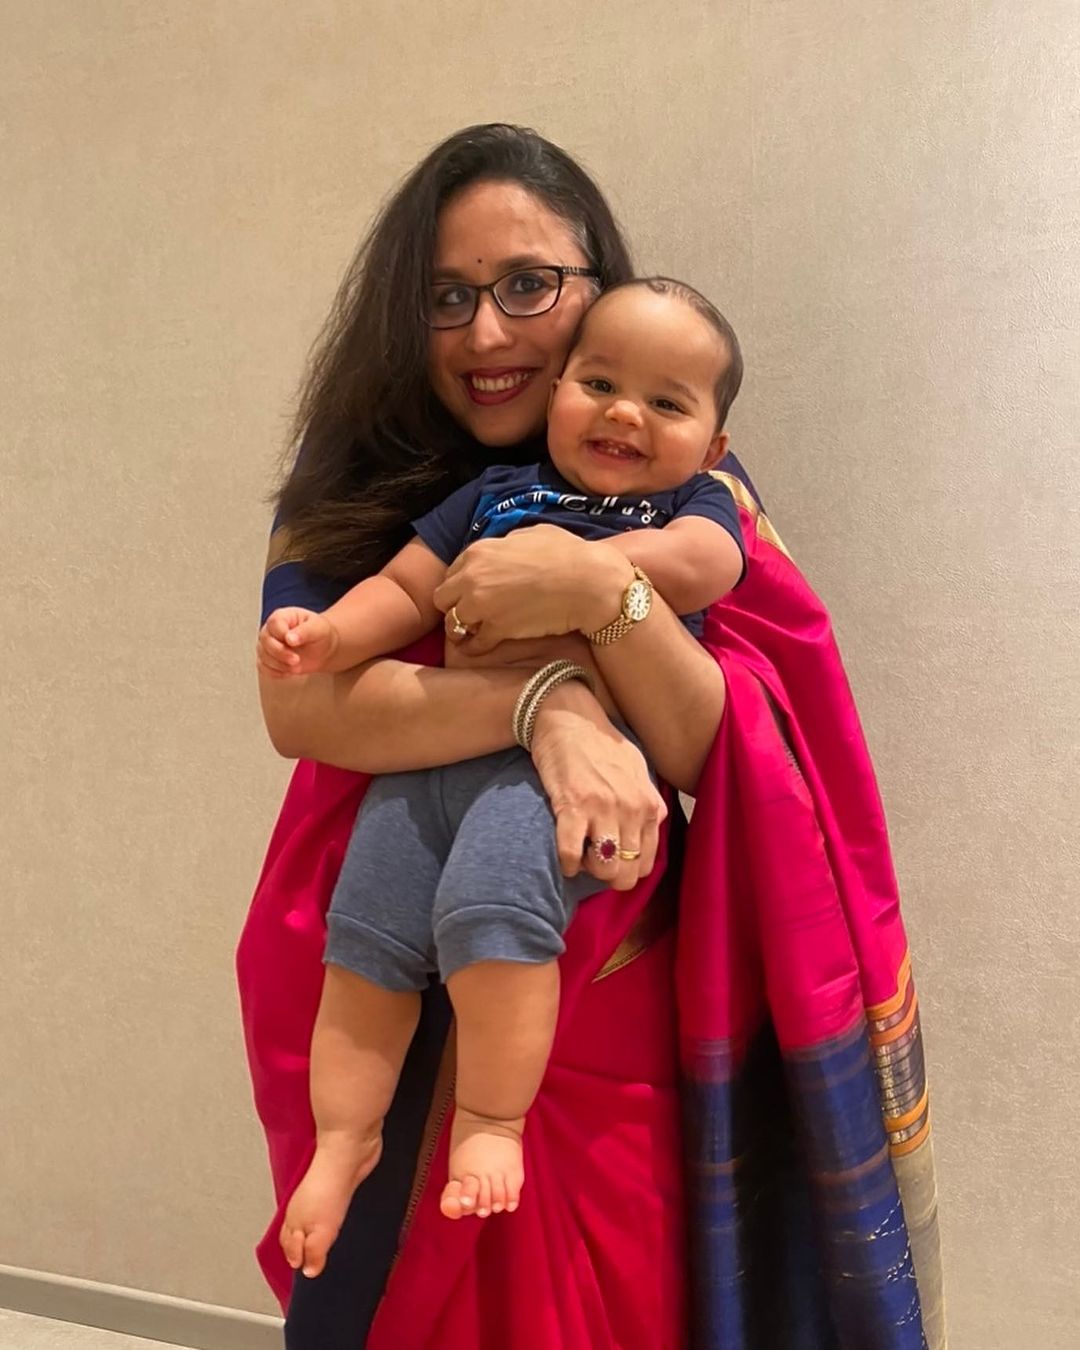 Shark Tank India 3’s Radhika Gupta’s Monday Motivation Post is How to overcome mom’s guilt for mothers